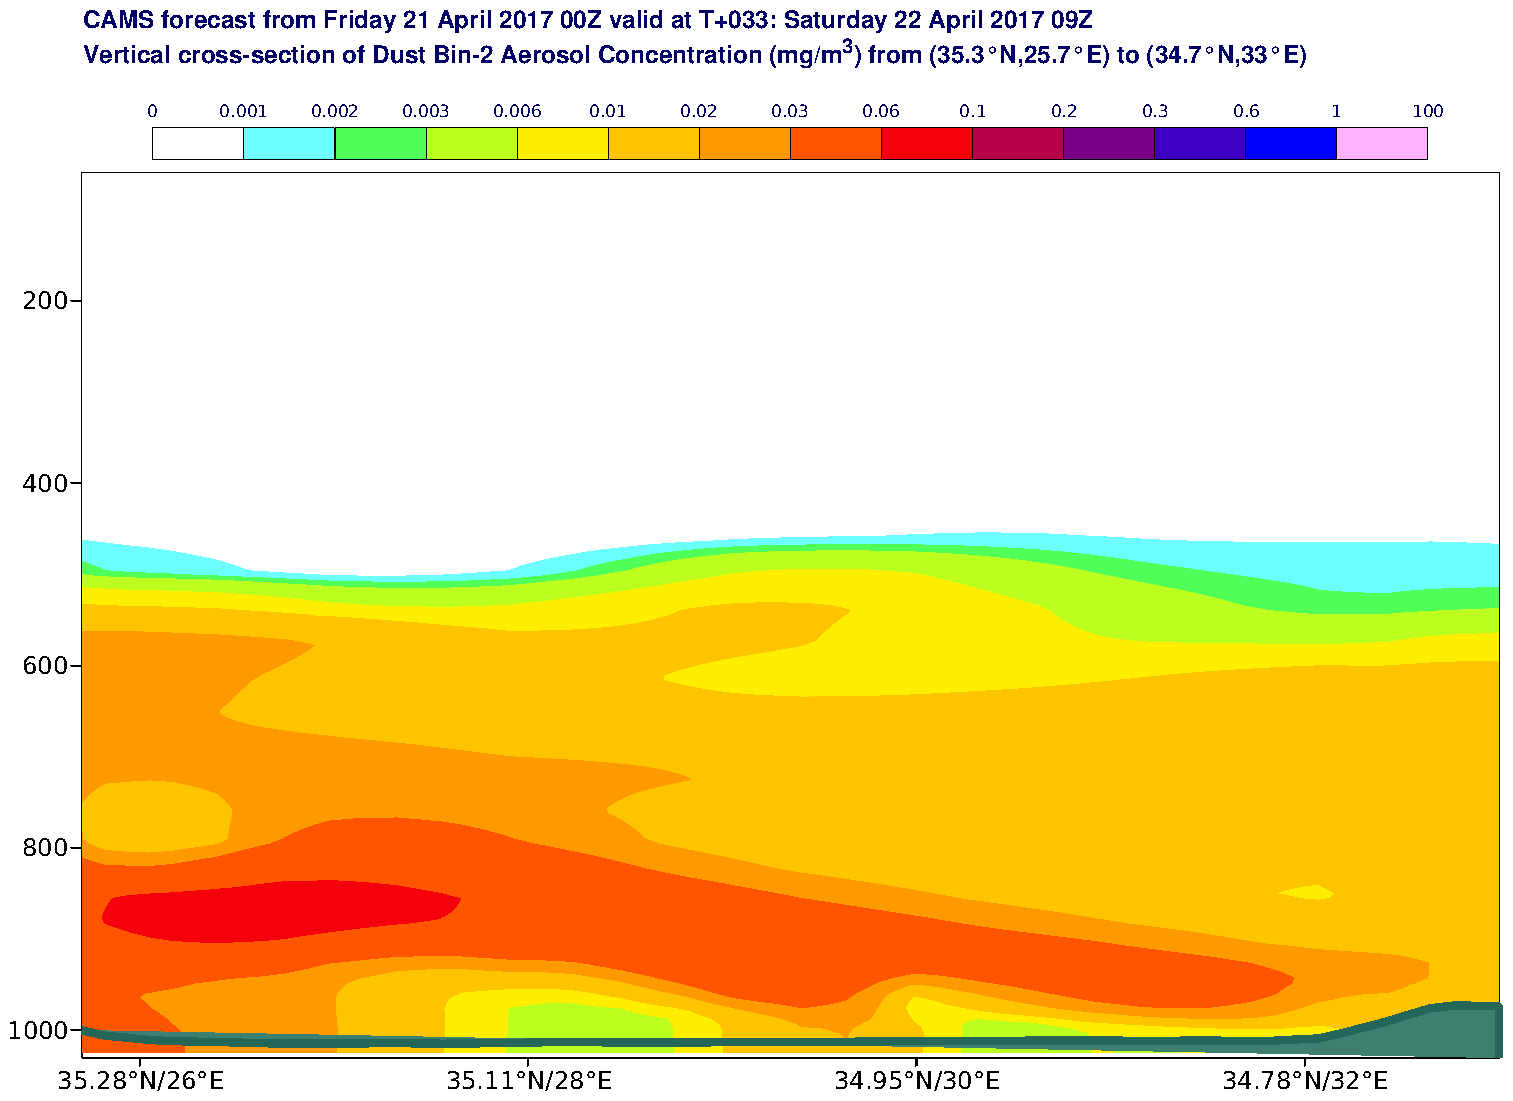 Vertical cross-section of Dust Bin-2 Aerosol Concentration (mg/m3) valid at T33 - 2017-04-22 09:00